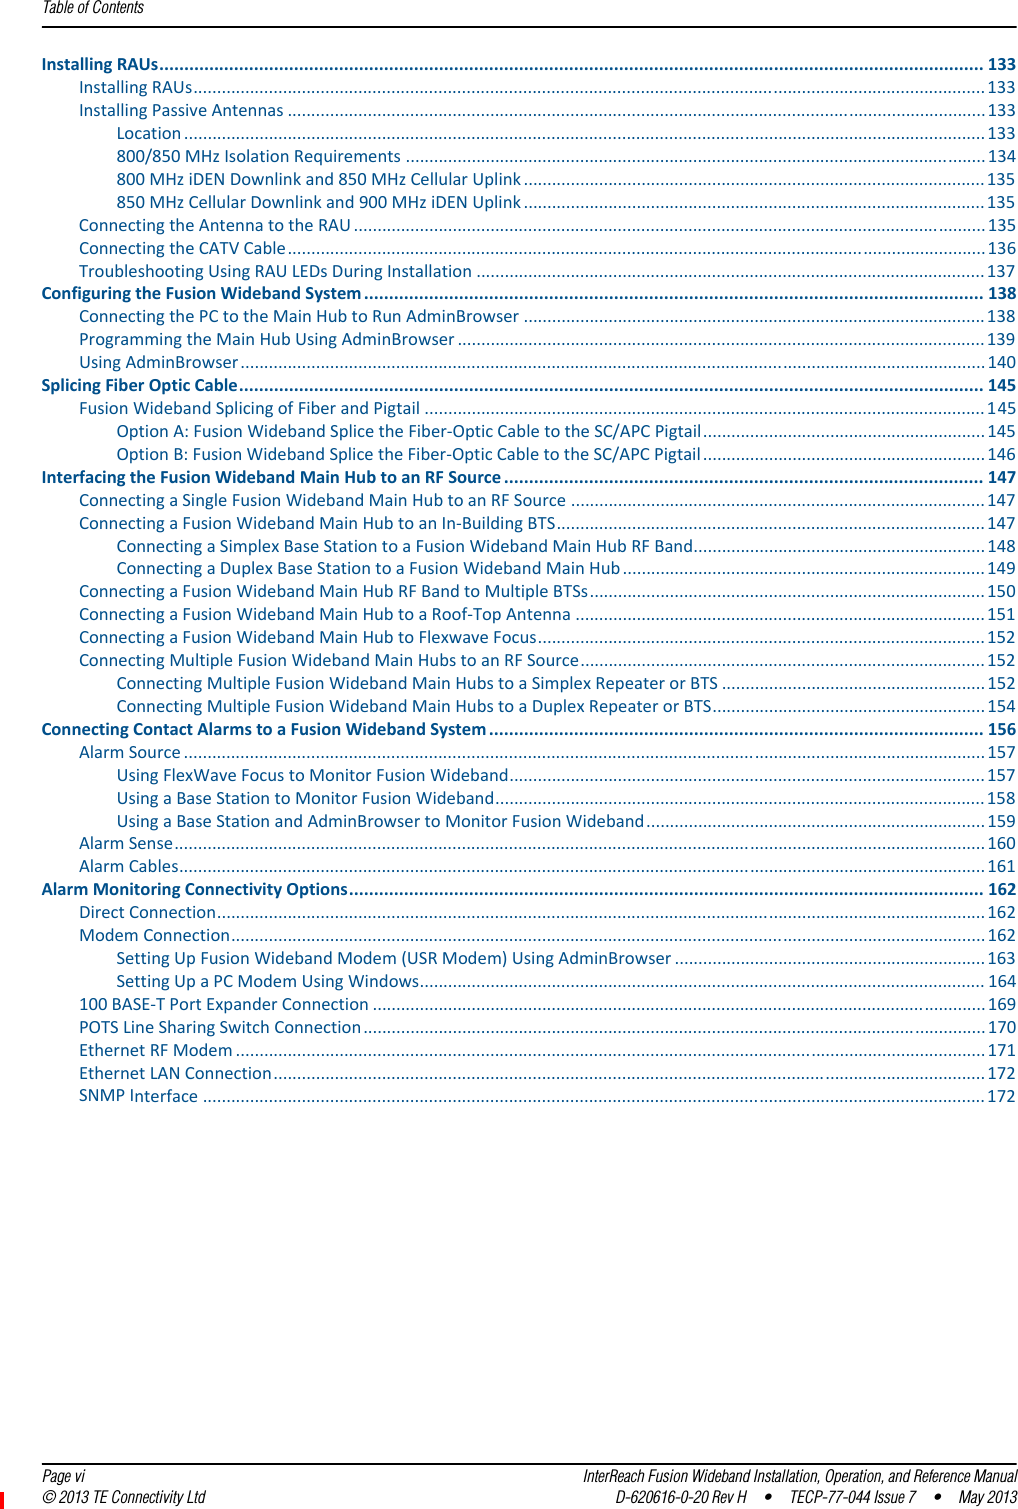 Table of Contents  Page vi InterReach Fusion Wideband Installation, Operation, and Reference Manual© 2013 TE Connectivity Ltd D-620616-0-20 Rev H  •  TECP-77-044 Issue 7  •  May 2013InstallingRAUs..................................................................................................................................................................... 133InstallingRAUs........................................................................................................................................................................133InstallingPassiveAntennas ....................................................................................................................................................133Location ..........................................................................................................................................................................133800/850MHzIsolationRequirements ...........................................................................................................................134800MHziDENDownlinkand850MHzCellularUplink ..................................................................................................135850MHzCellularDownlinkand900MHziDENUplink .................................................................................................. 135ConnectingtheAntennatotheRAU ......................................................................................................................................135ConnectingtheCATVCable....................................................................................................................................................136TroubleshootingUsingRAULEDsDuringInstallation ............................................................................................................137ConfiguringtheFusionWidebandSystem ............................................................................................................................ 138ConnectingthePCtotheMainHubtoRunAdminBrowser ..................................................................................................138ProgrammingtheMainHubUsingAdminBrowser ................................................................................................................139UsingAdminBrowser..............................................................................................................................................................140SplicingFiberOpticCable..................................................................................................................................................... 145FusionWidebandSplicingofFiberandPigtail .......................................................................................................................145OptionA:FusionWidebandSplicetheFiber‐OpticCabletotheSC/APCPigtail............................................................145OptionB:FusionWidebandSplicetheFiber‐OpticCabletotheSC/APCPigtail ............................................................146InterfacingtheFusionWidebandMainHubtoanRFSource ................................................................................................ 147ConnectingaSingleFusionWidebandMainHubtoanRFSource ........................................................................................147ConnectingaFusionWidebandMainHubtoanIn‐BuildingBTS...........................................................................................147ConnectingaSimplexBaseStationtoaFusionWidebandMainHubRFBand..............................................................148ConnectingaDuplexBaseStationtoaFusionWidebandMainHub ............................................................................. 149ConnectingaFusionWidebandMainHubRFBandtoMultipleBTSs....................................................................................150ConnectingaFusionWidebandMainHubtoaRoof‐TopAntenna .......................................................................................151ConnectingaFusionWidebandMainHubtoFlexwaveFocus...............................................................................................152ConnectingMultipleFusionWidebandMainHubstoanRFSource......................................................................................152ConnectingMultipleFusionWidebandMainHubstoaSimplexRepeaterorBTS ........................................................152ConnectingMultipleFusionWidebandMainHubstoaDuplexRepeaterorBTS..........................................................154ConnectingContactAlarmstoaFusionWidebandSystem ................................................................................................... 156AlarmSource ..........................................................................................................................................................................157UsingFlexWaveFocustoMonitorFusionWideband.....................................................................................................157UsingaBaseStationtoMonitorFusionWideband........................................................................................................158UsingaBaseStationandAdminBrowsertoMonitorFusionWideband........................................................................159AlarmSense............................................................................................................................................................................160AlarmCables...........................................................................................................................................................................161AlarmMonitoringConnectivityOptions............................................................................................................................... 162DirectConnection...................................................................................................................................................................162ModemConnection................................................................................................................................................................162SettingUpFusionWidebandModem(USRModem)UsingAdminBrowser ..................................................................163SettingUpaPCModemUsingWindows........................................................................................................................ 164100BASE‐TPortExpanderConnection ..................................................................................................................................169POTSLineSharingSwitchConnection....................................................................................................................................170EthernetRFModem ...............................................................................................................................................................171EthernetLANConnection.......................................................................................................................................................172SNMPInterface ......................................................................................................................................................................172